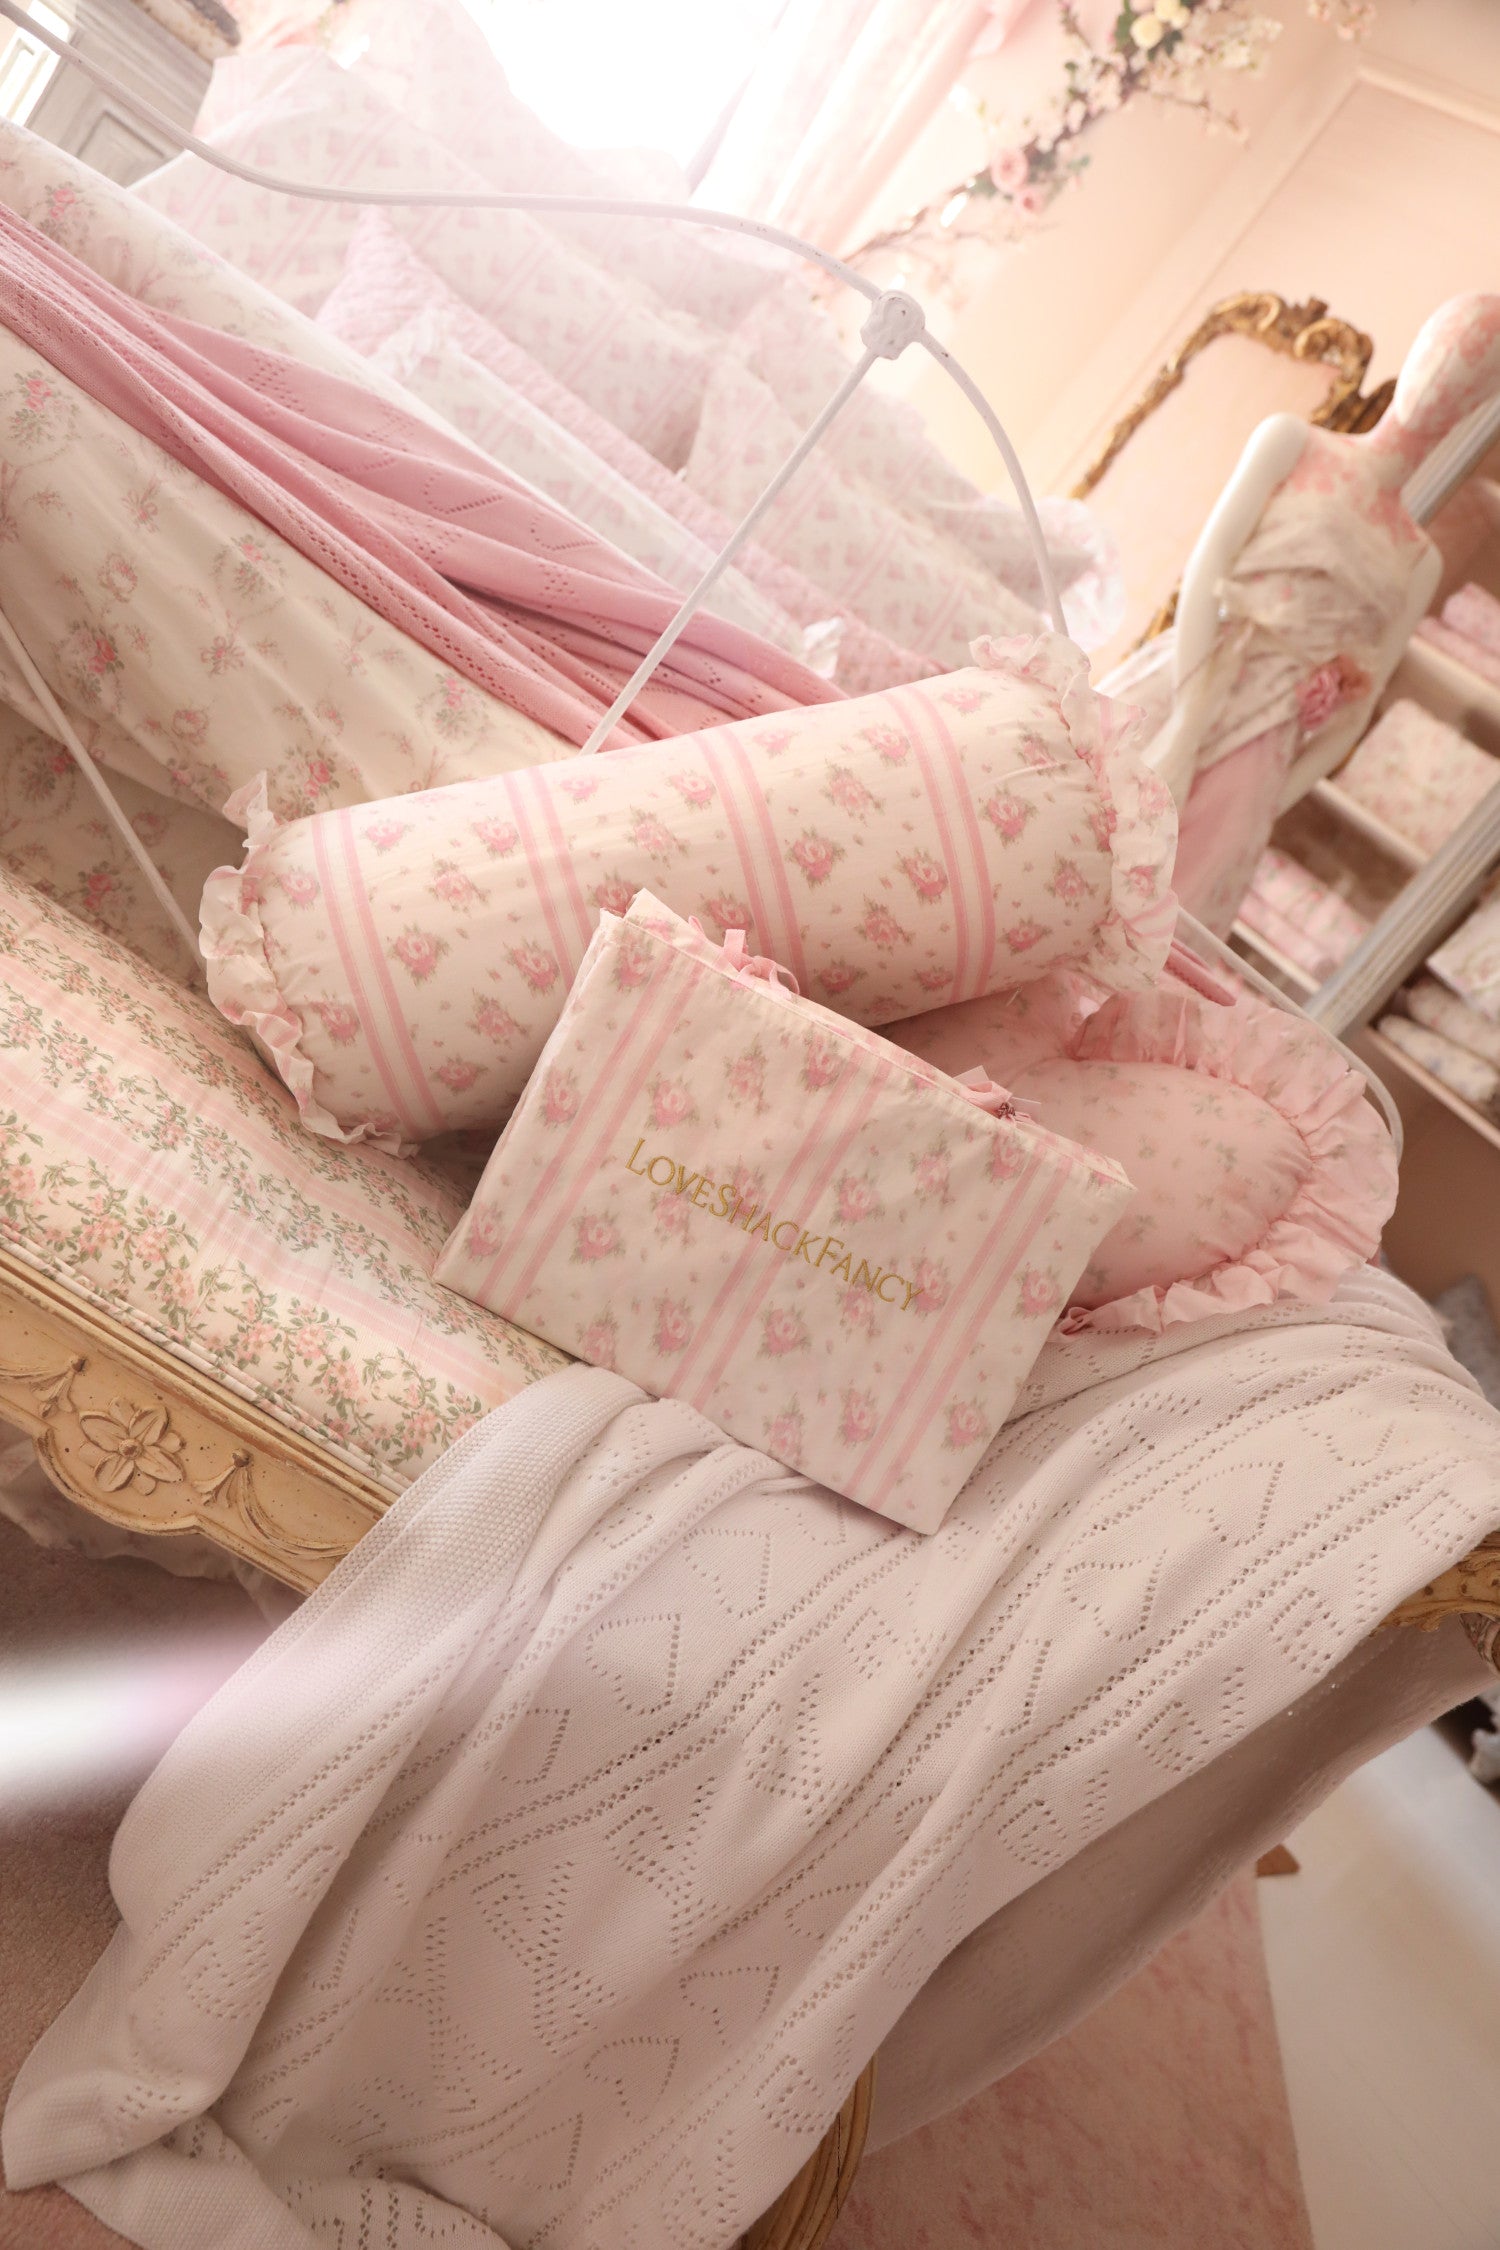  Introducing our lightweight and airy sheets in a beautiful floral pink design. Crafted from 100% cotton, these sheets offer the perfect combination of comfort and breathability.